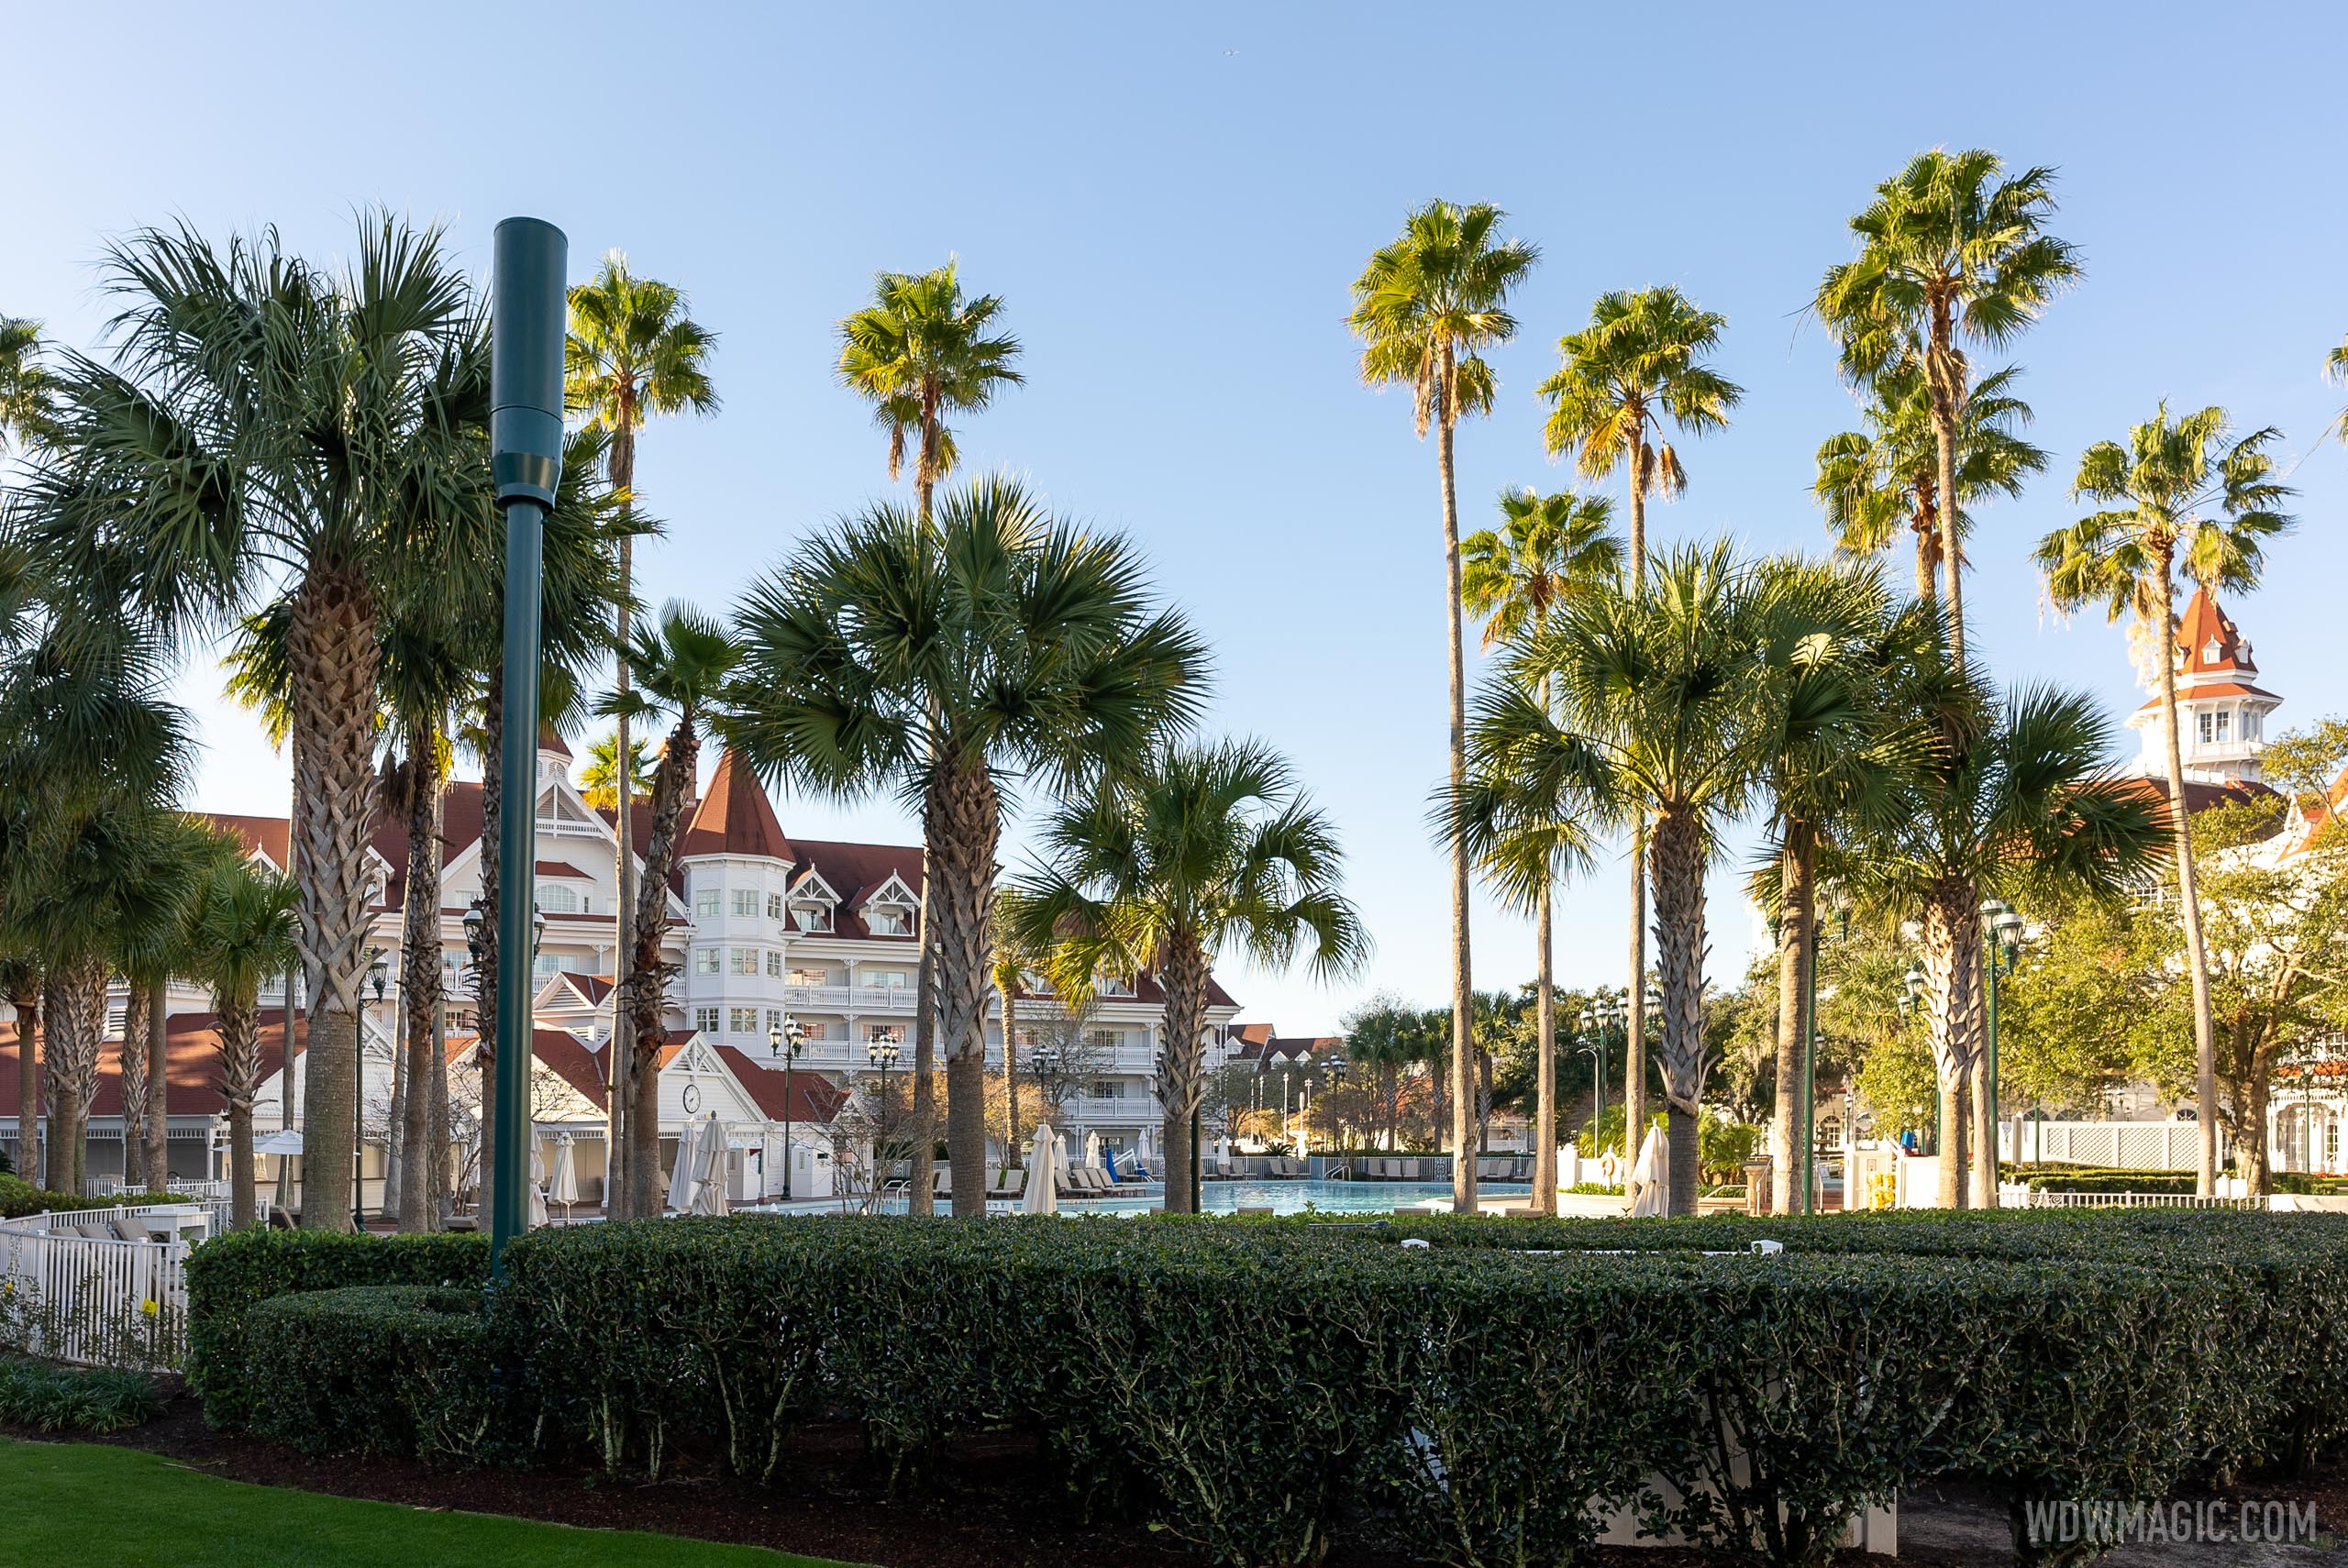 5G cell towers at Disney's Grand Floridian Resort